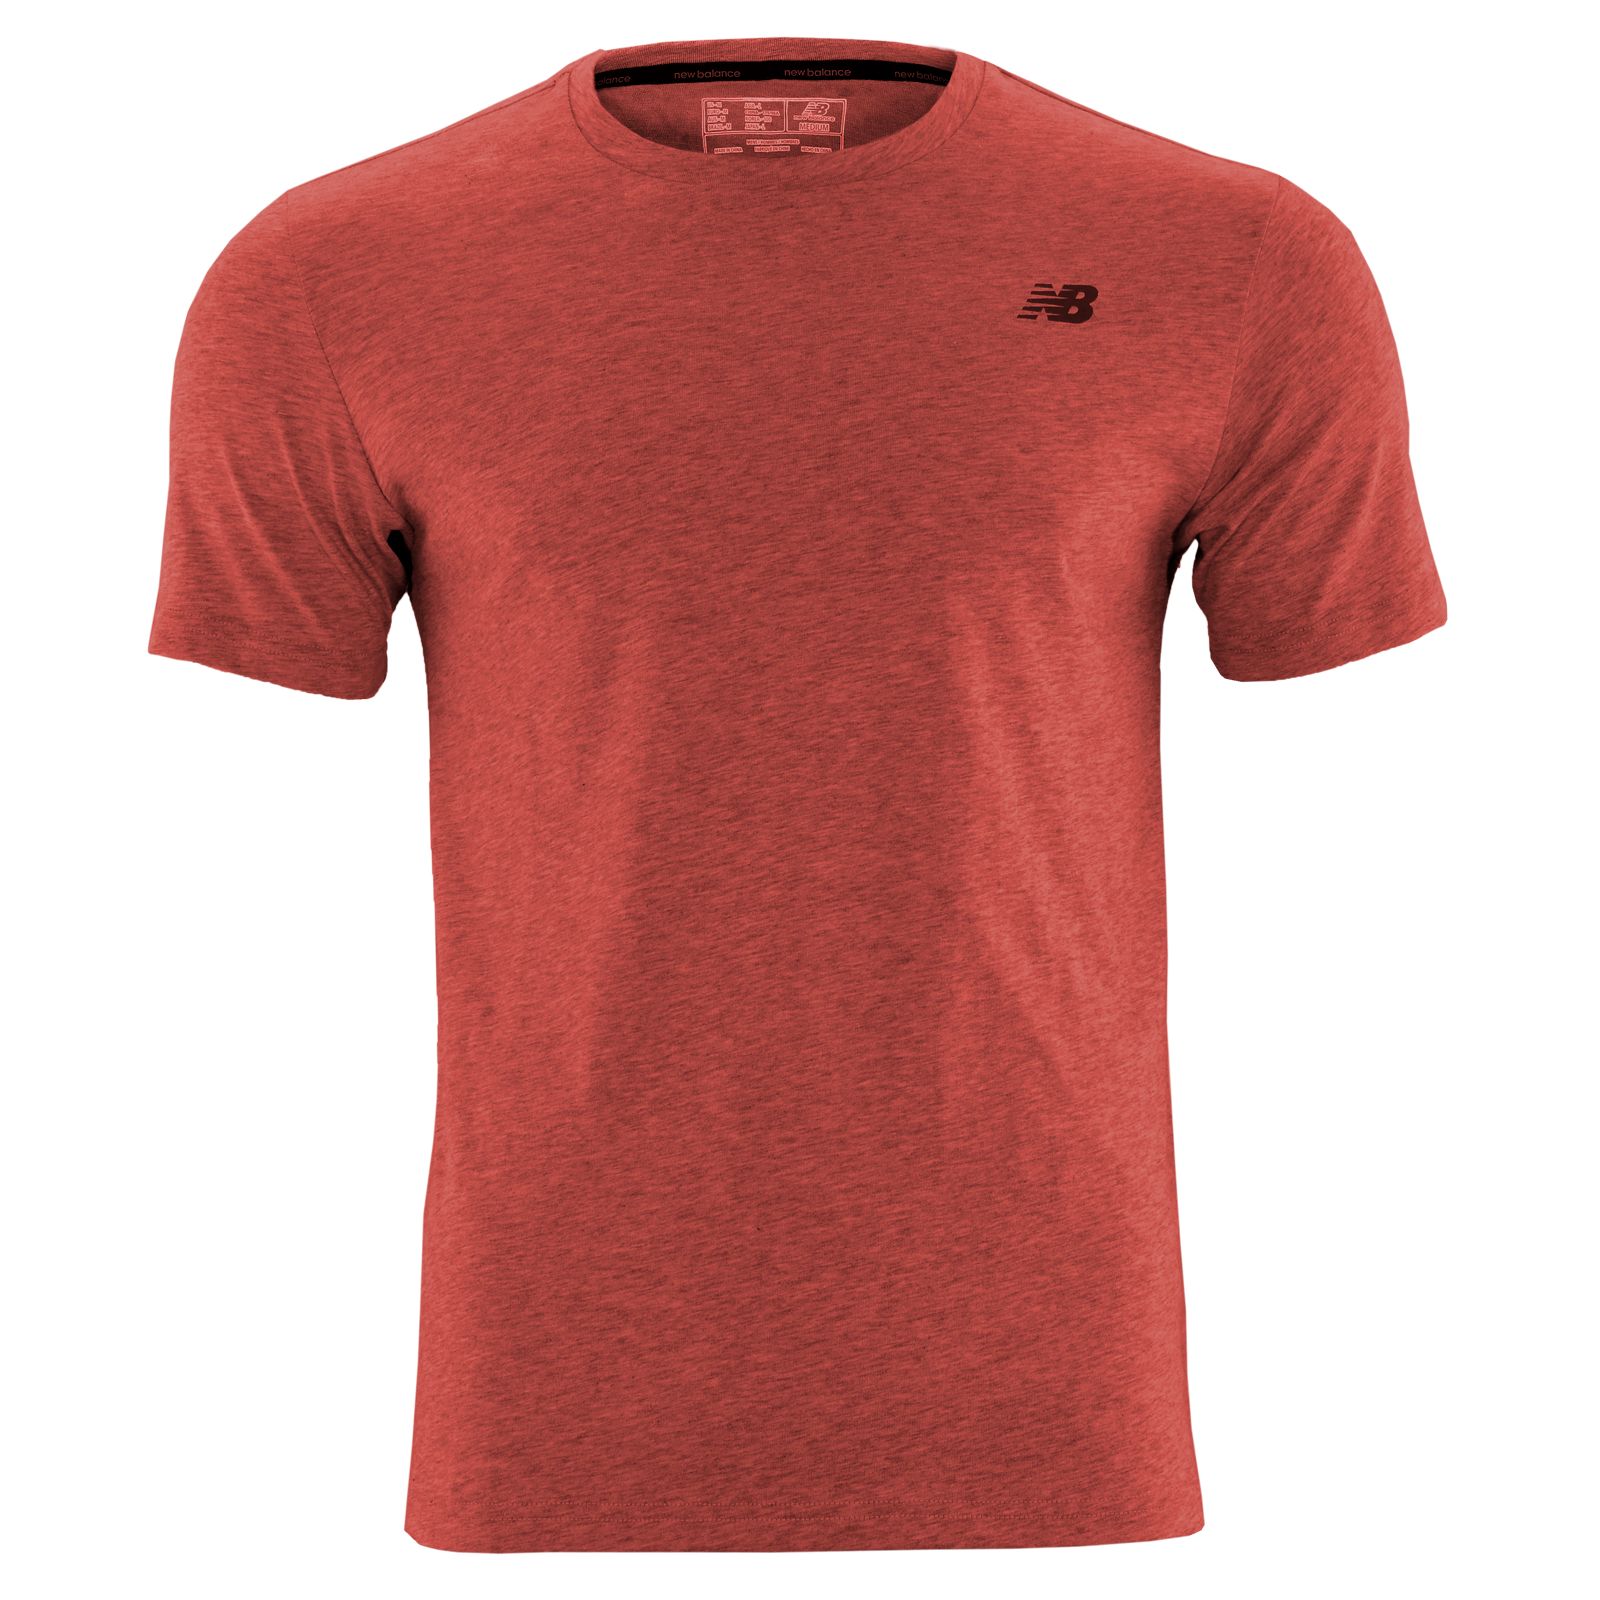 Heather Tech Tee, Red Heather image number 0